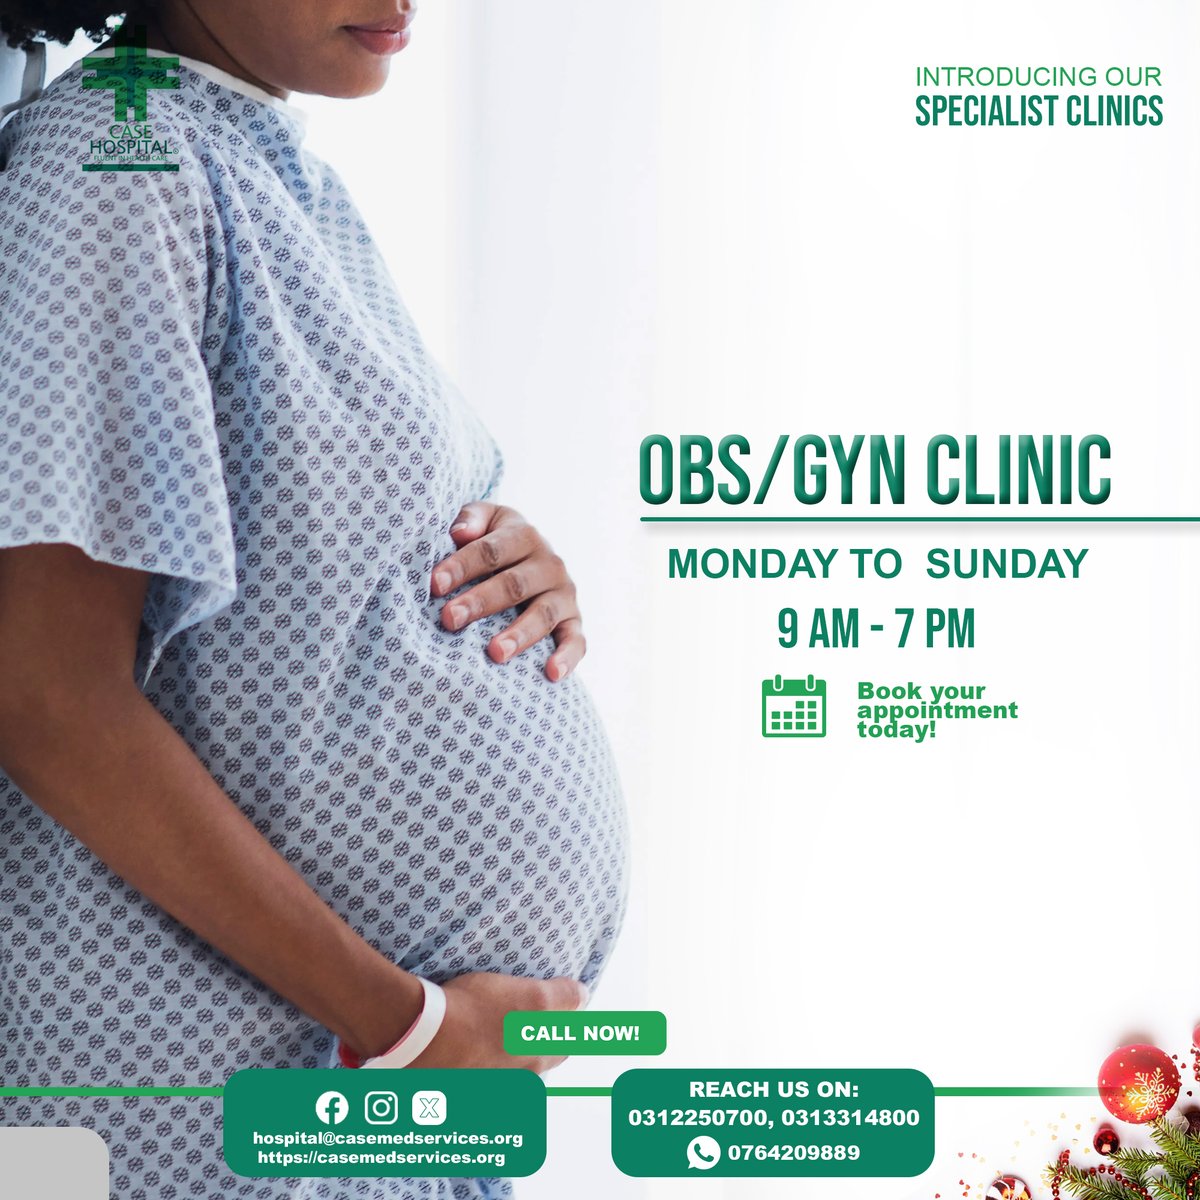 The ObsGyn clinic at Case Hospital is OPEN, providing expert care for women and expectant mothers. Your health and well-being are our priority. Schedule your appointment today and experience compassionate, specialized care. 🏥💖 #WomensHealth #PrenatalCare